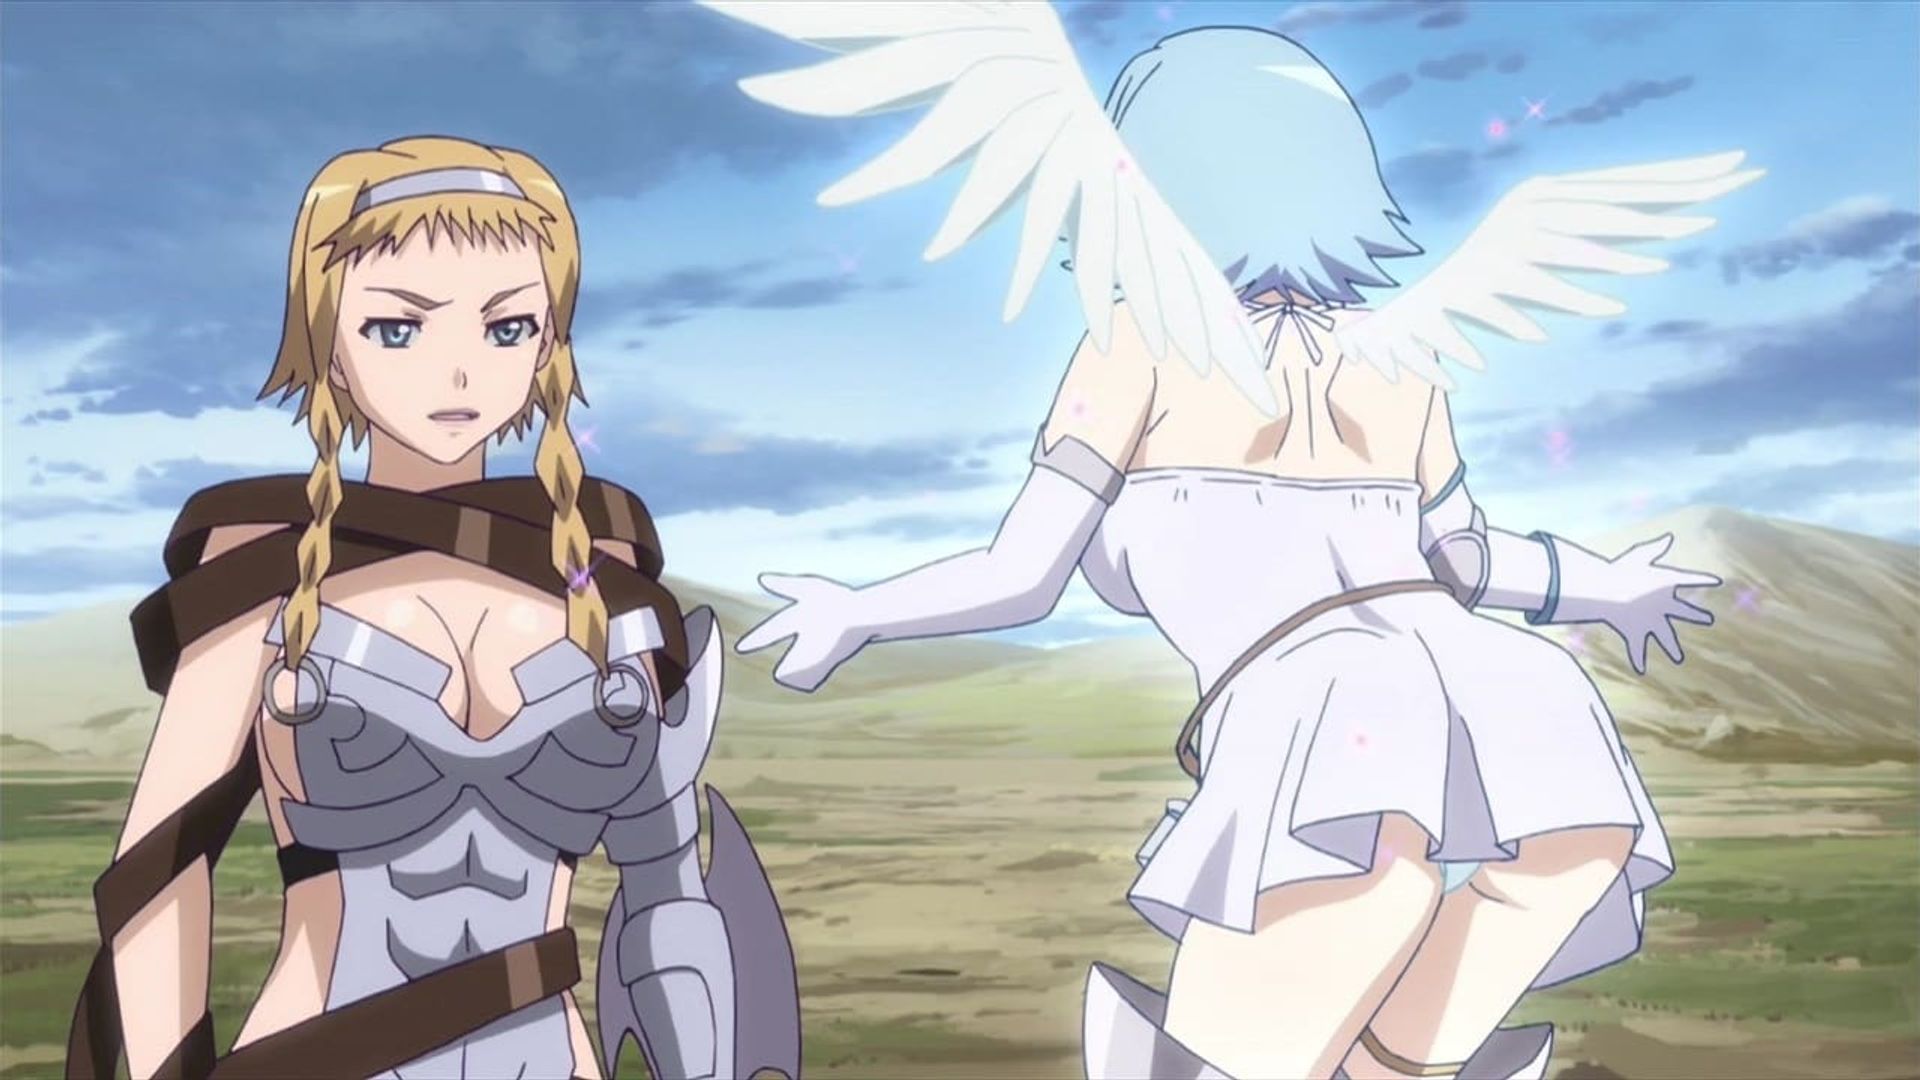 Queen's Blade: The Exiled Virgin background